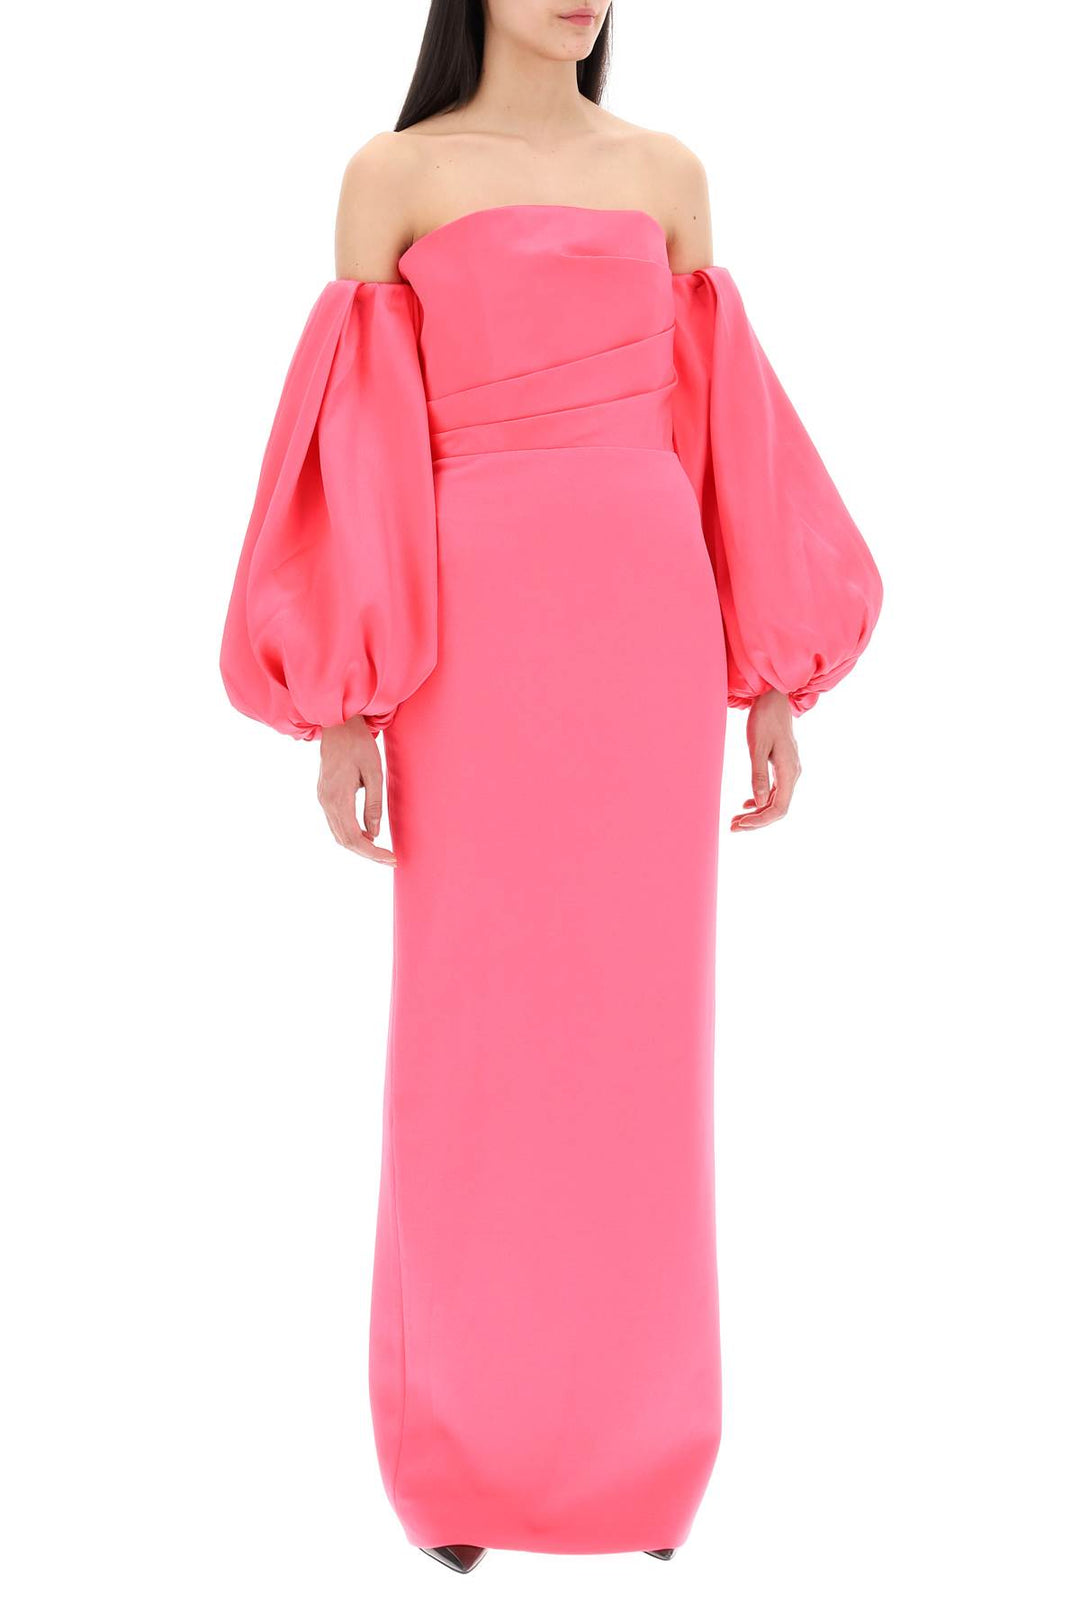 Solace London Maxi Dress Carmen With Balloon Sleeves   Pink